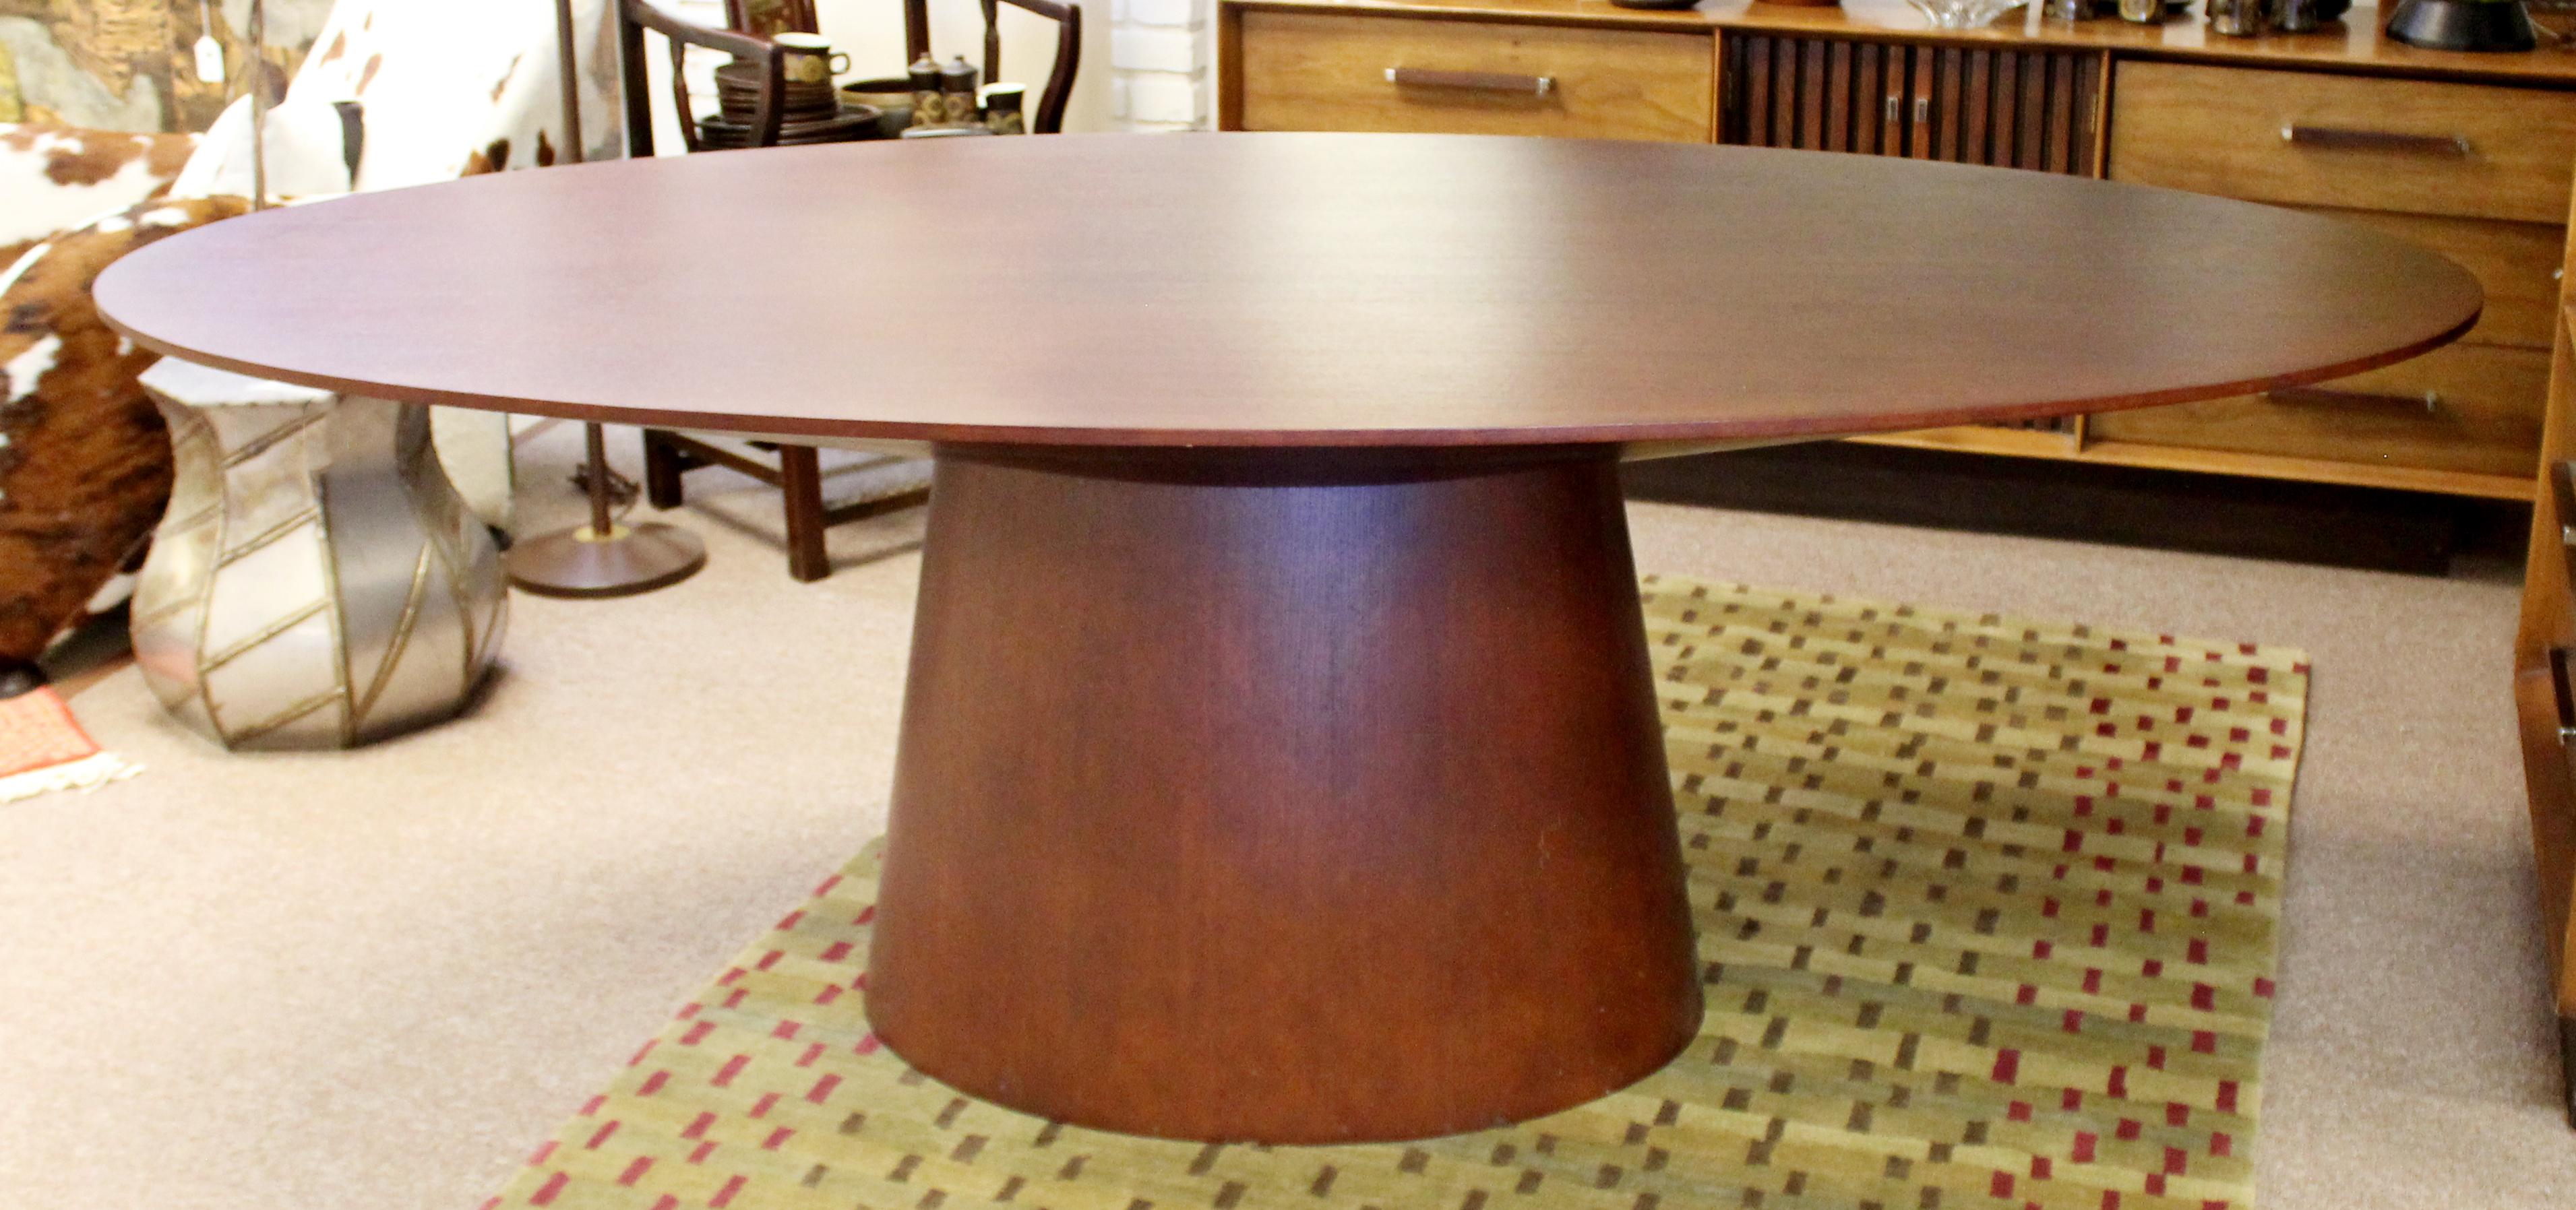 For your consideration is a stunning, oval shaped wood dining table, by Sullivan, circa the 1990s. In excellent condition. The dimensions are 84